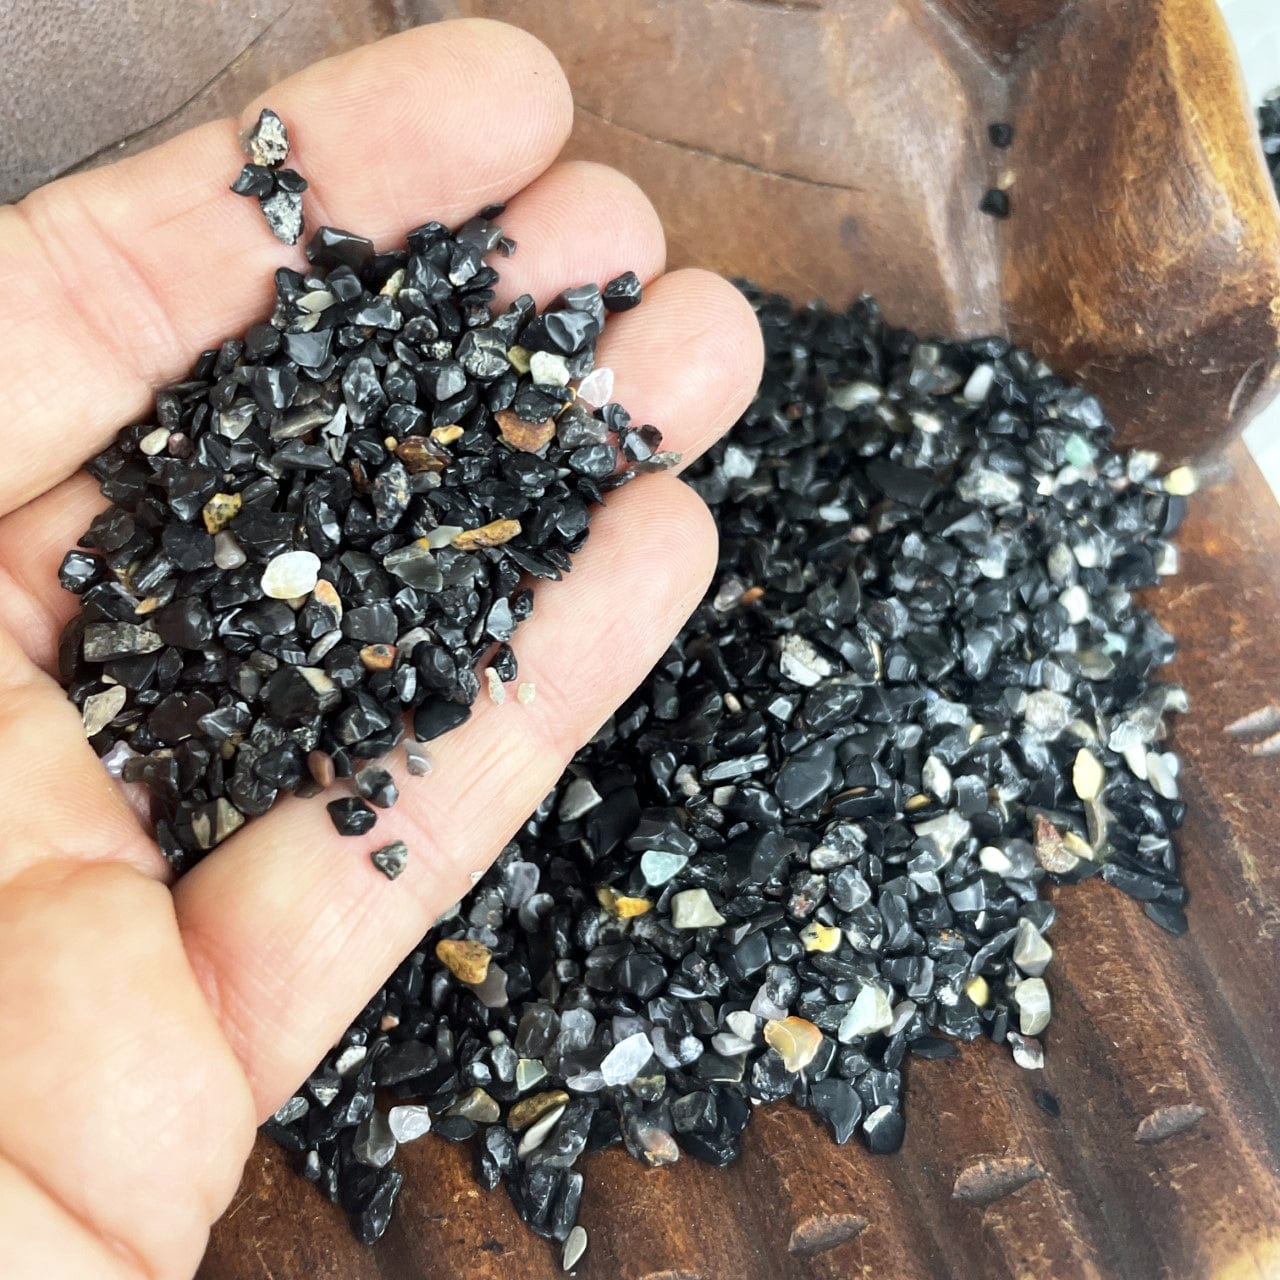 Black Onyx 1lb bag - Tiny Chips in a hand for size